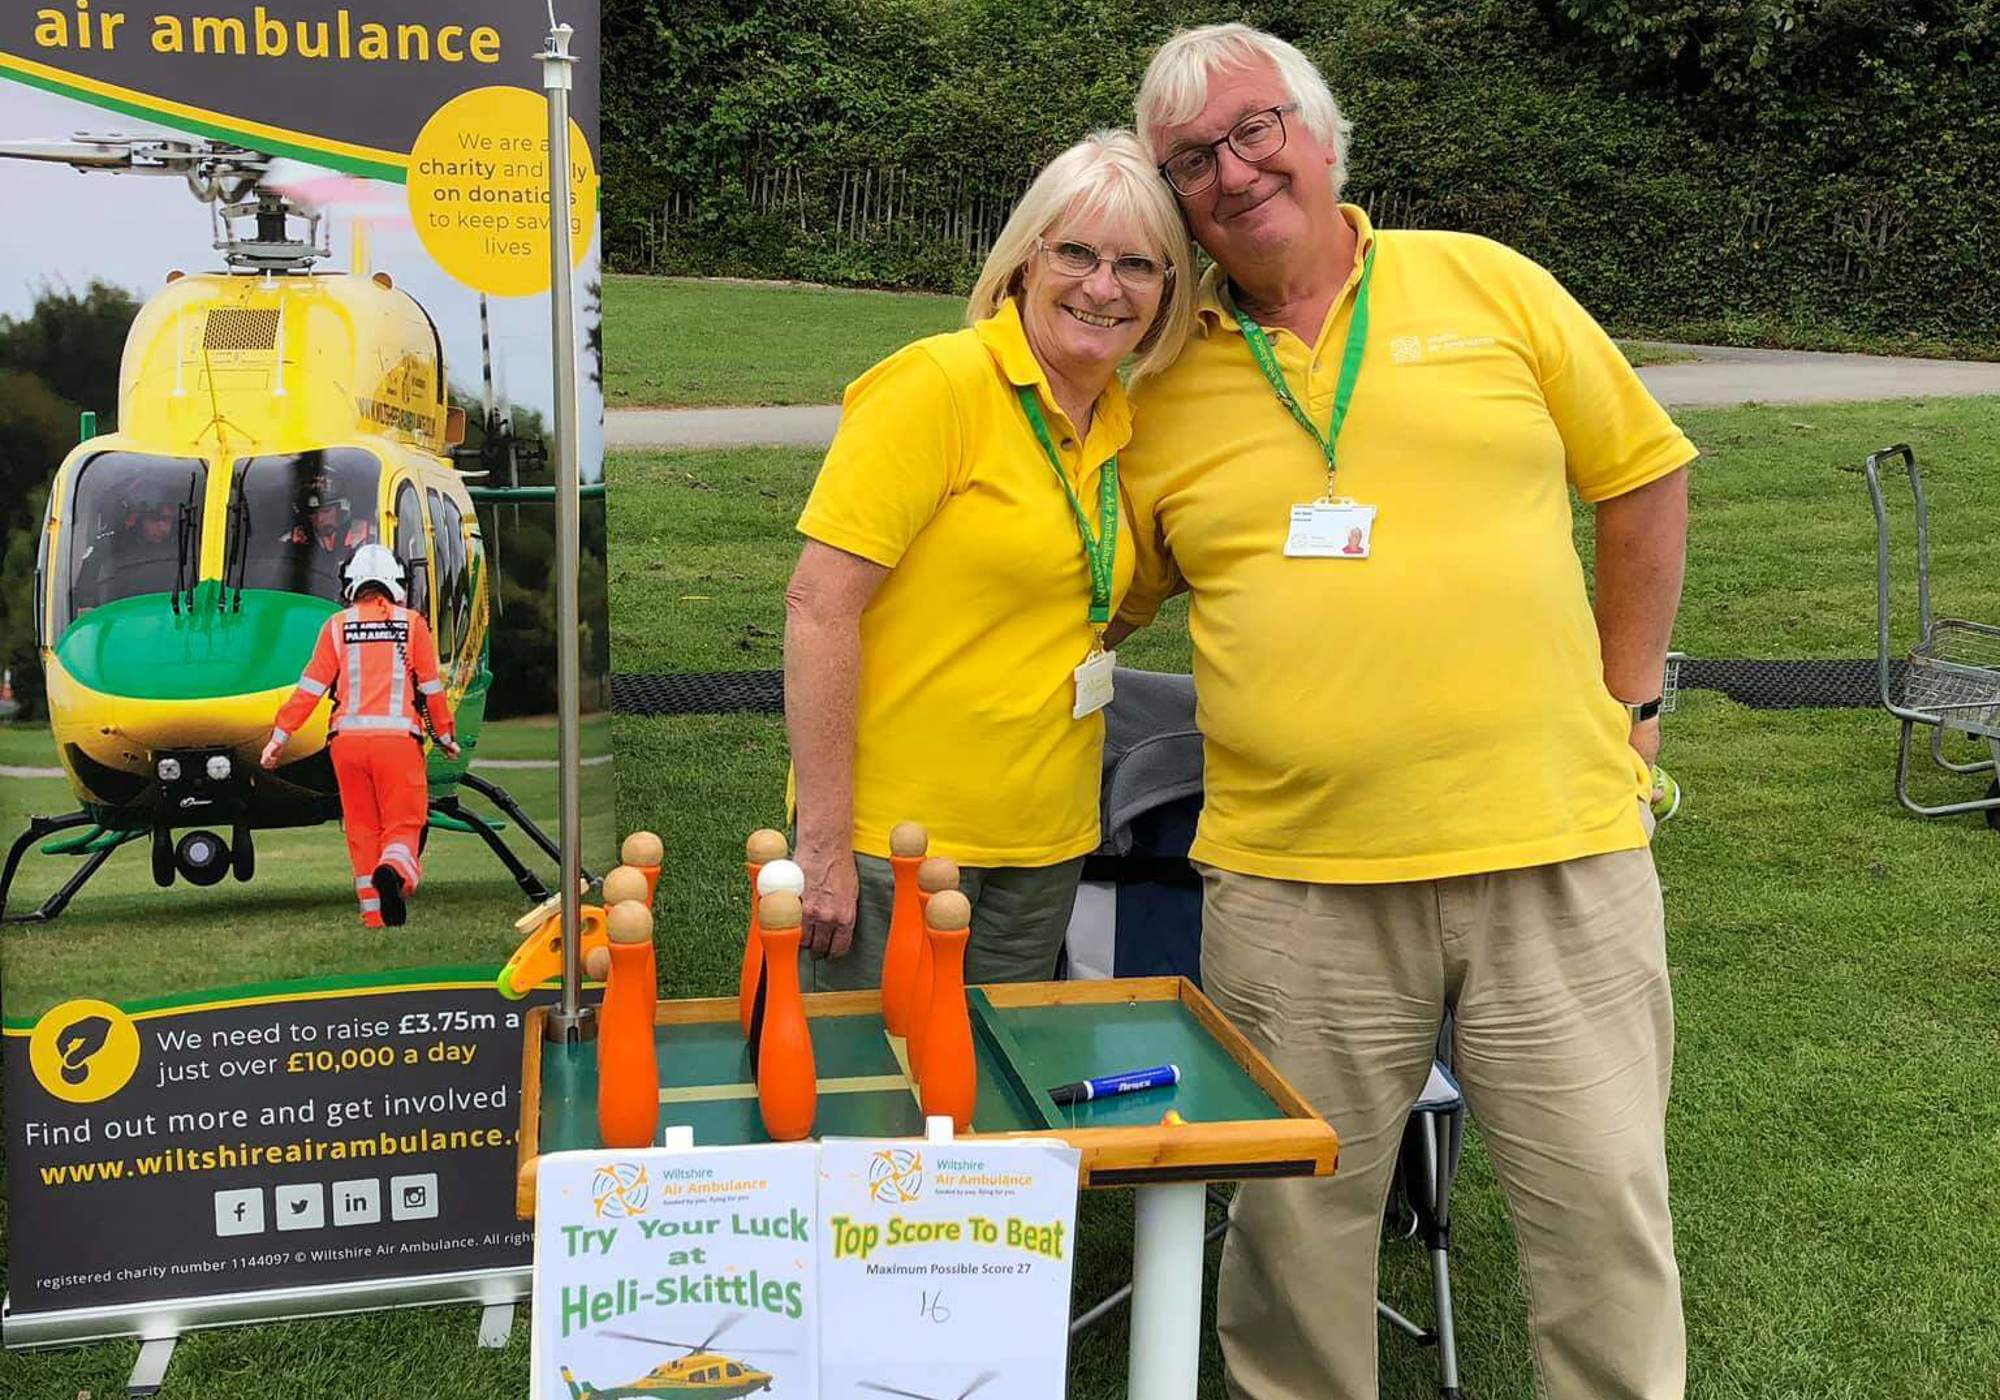 Two volunteers stood in front of a Wiltshire Air Ambulance banner at an event.